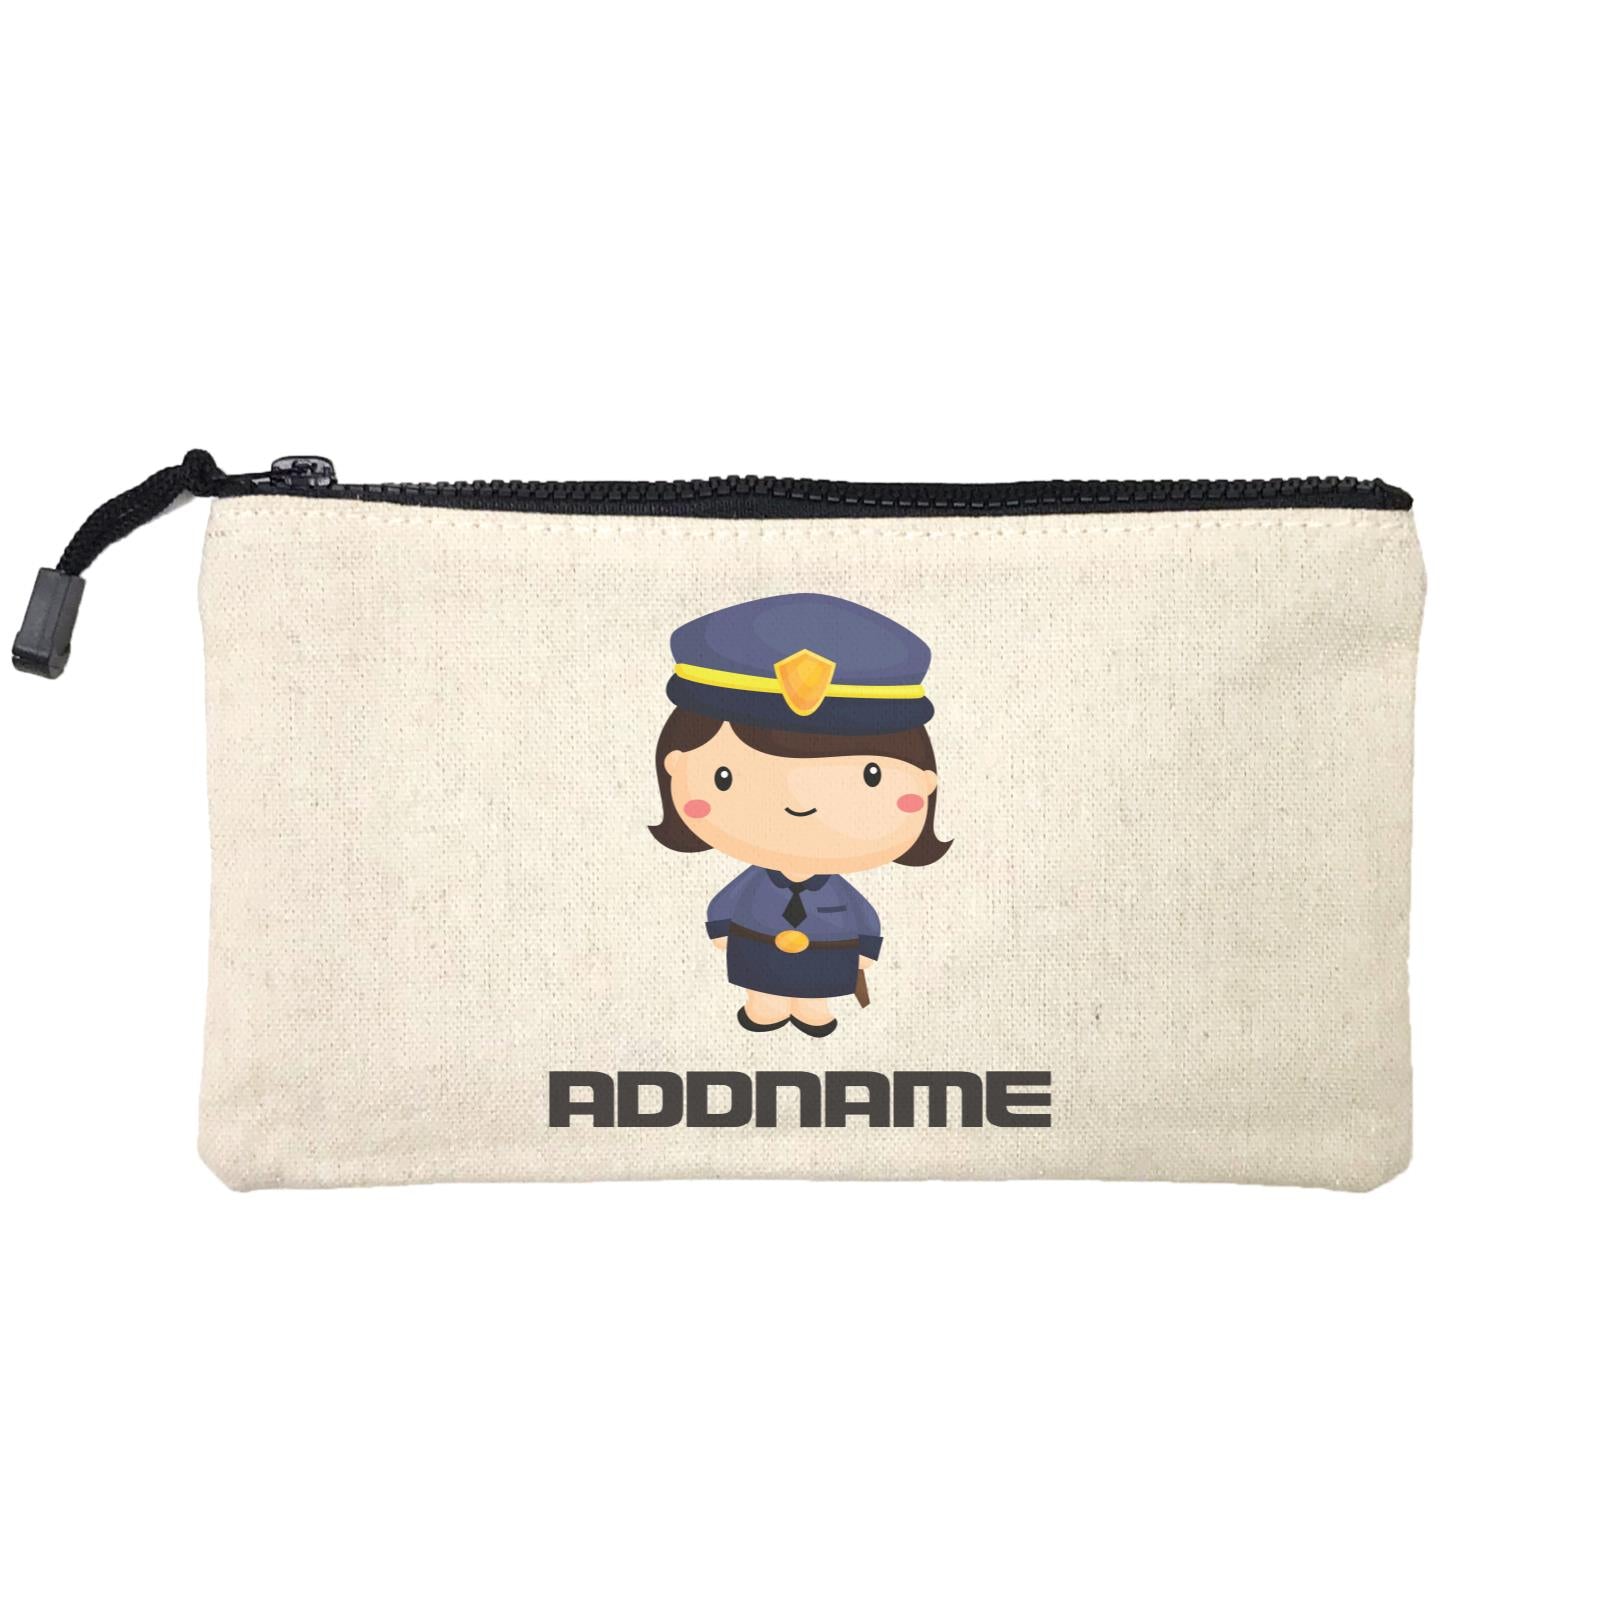 Birthday Police Officer Short Hair Girl  In Suit Addname Mini Accessories Stationery Pouch